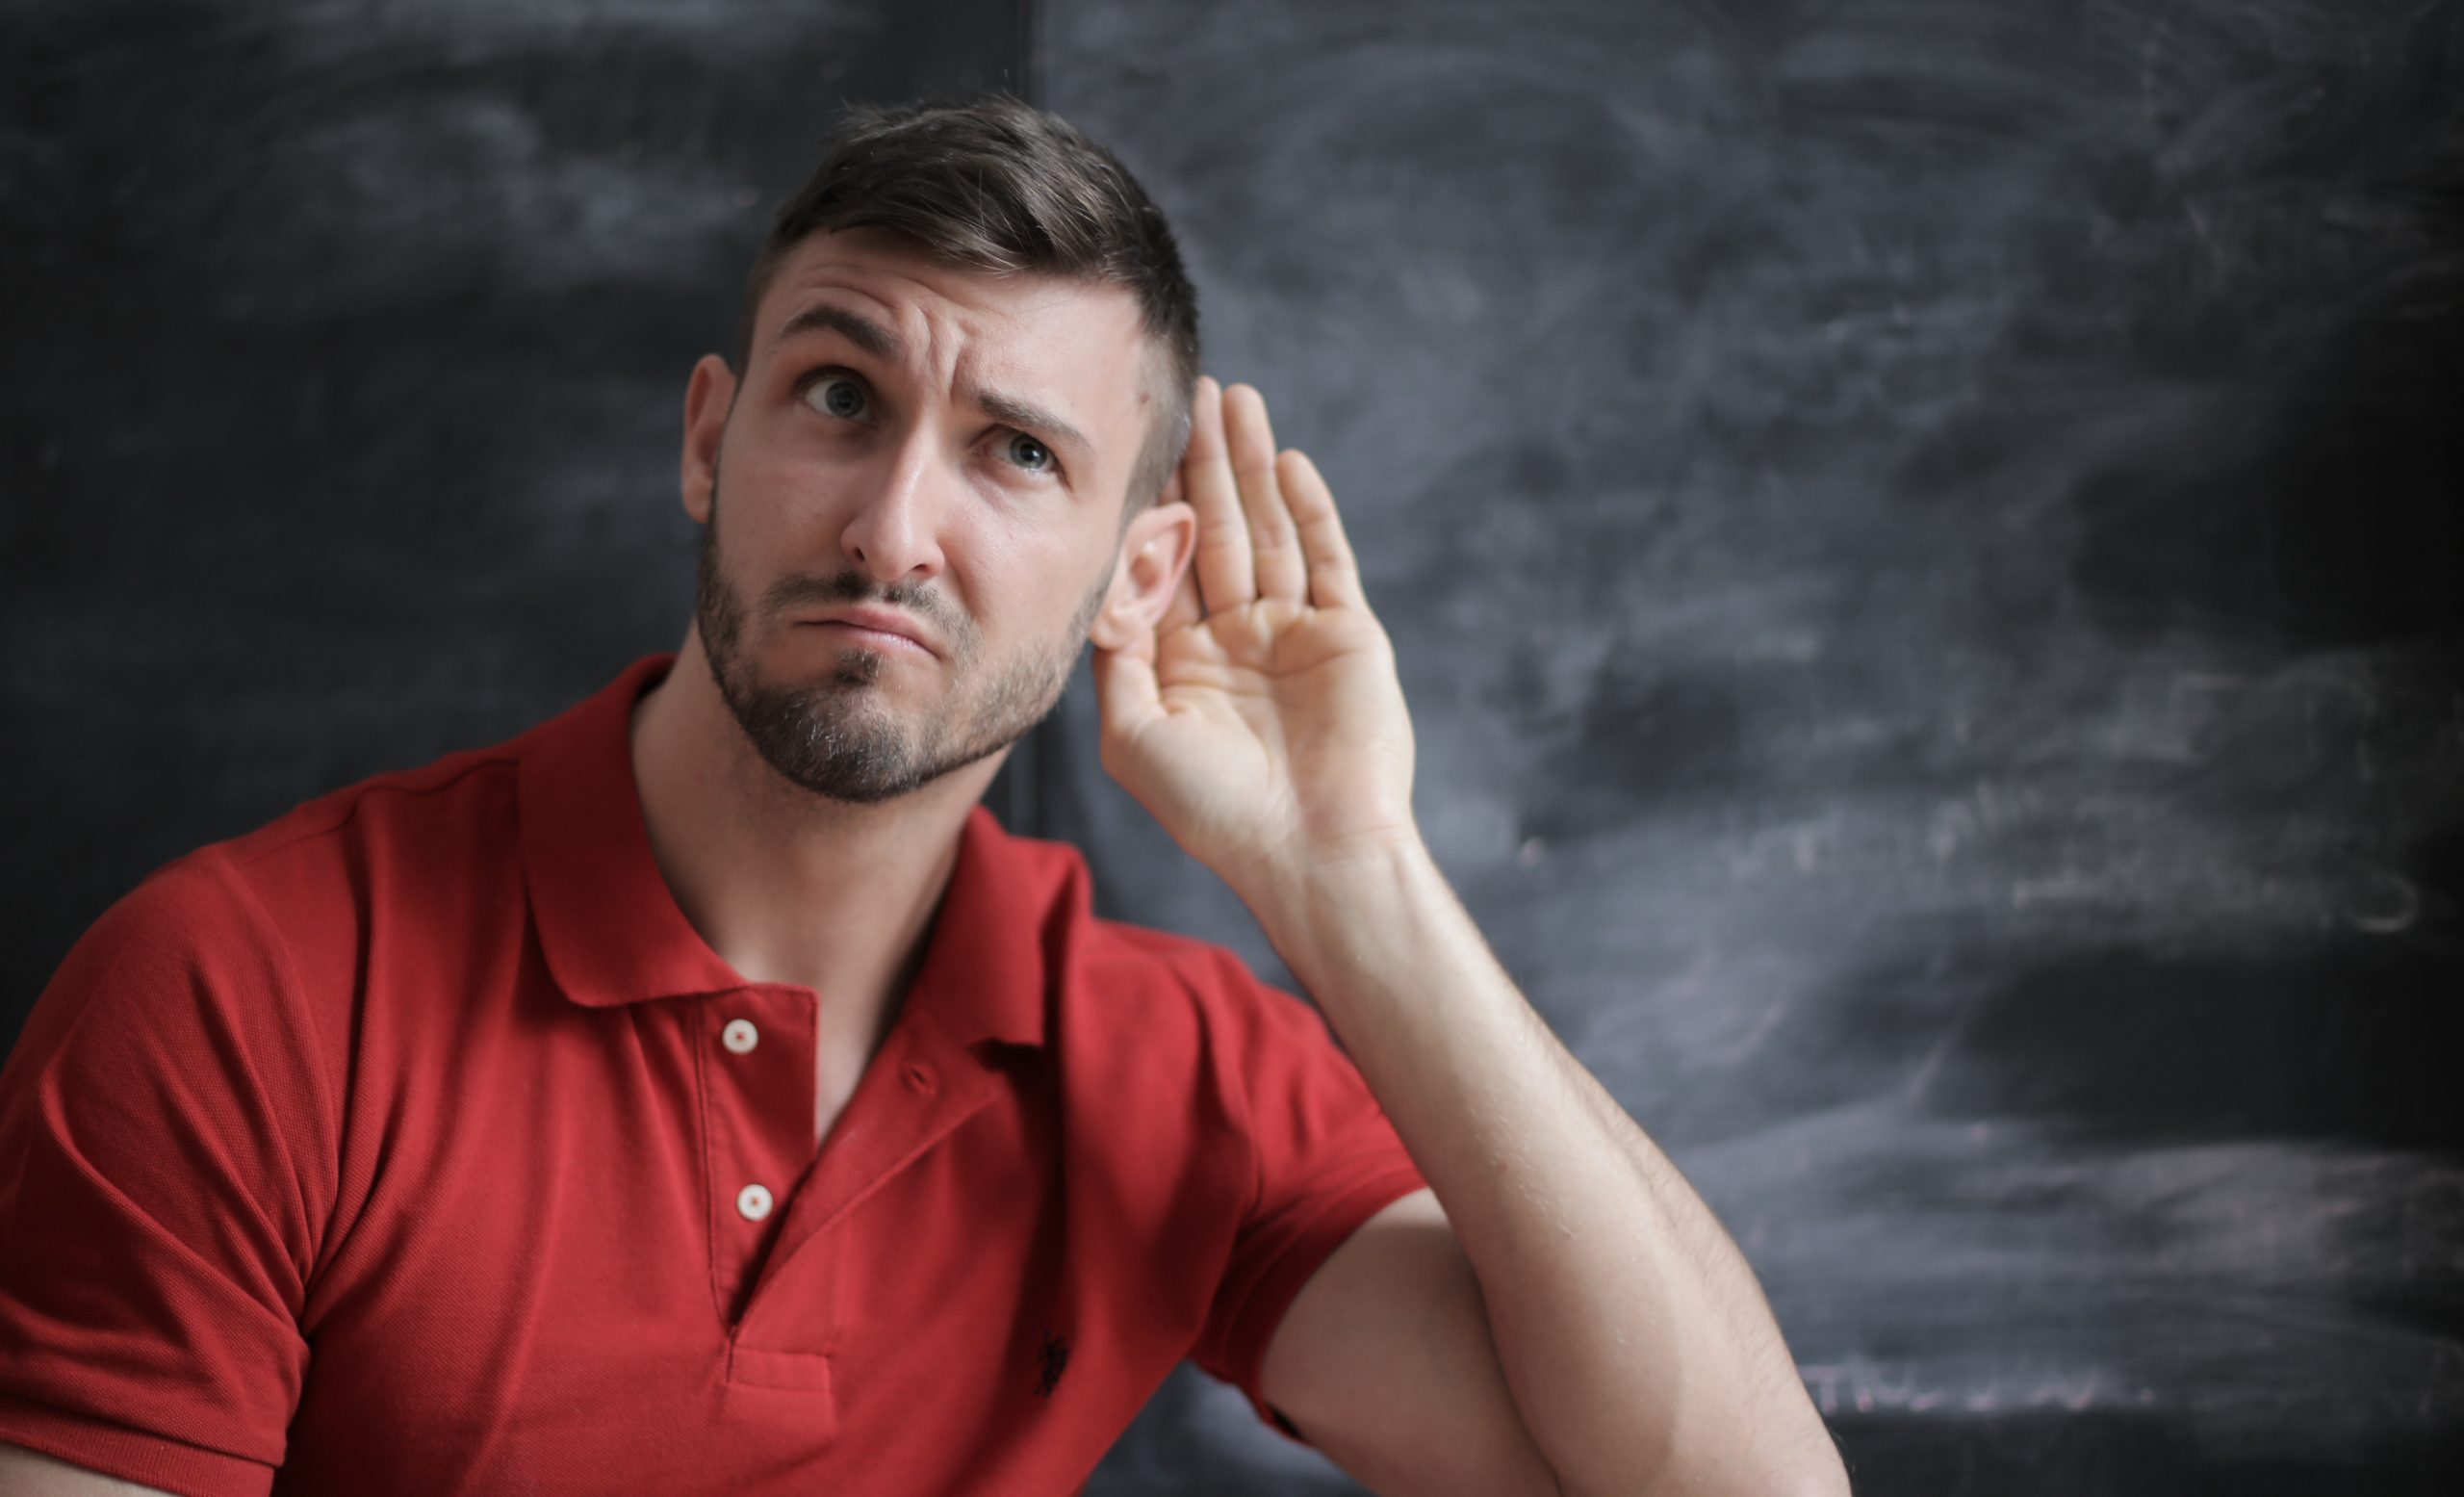 Man in a red shirt holding his hand up to his ear as if he is trying to hear better.